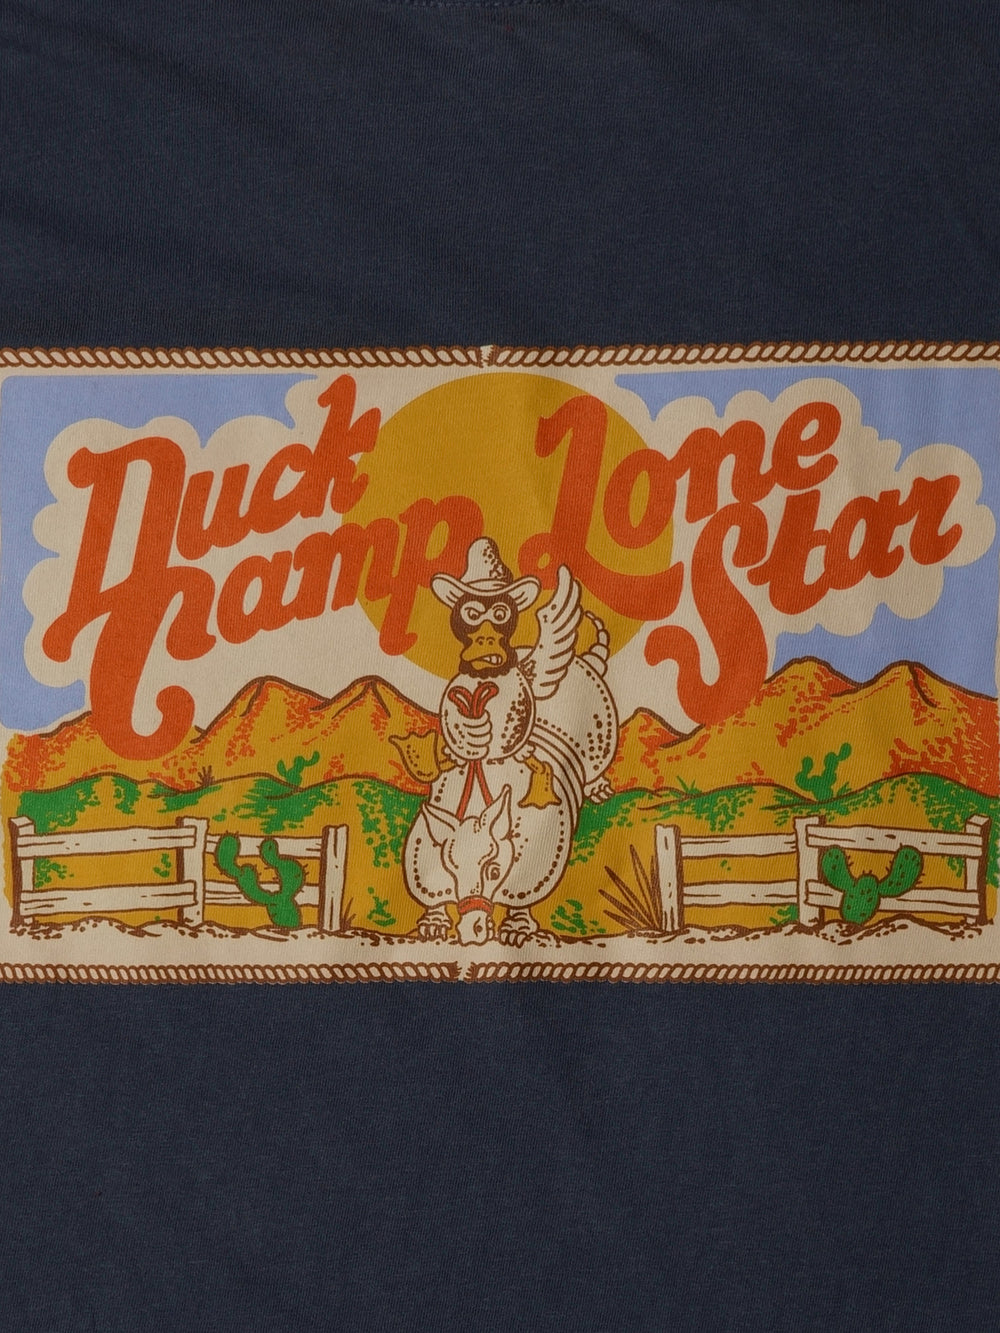 Duck Camp x Lone Star - Riding Into the Sunset T-Shirt